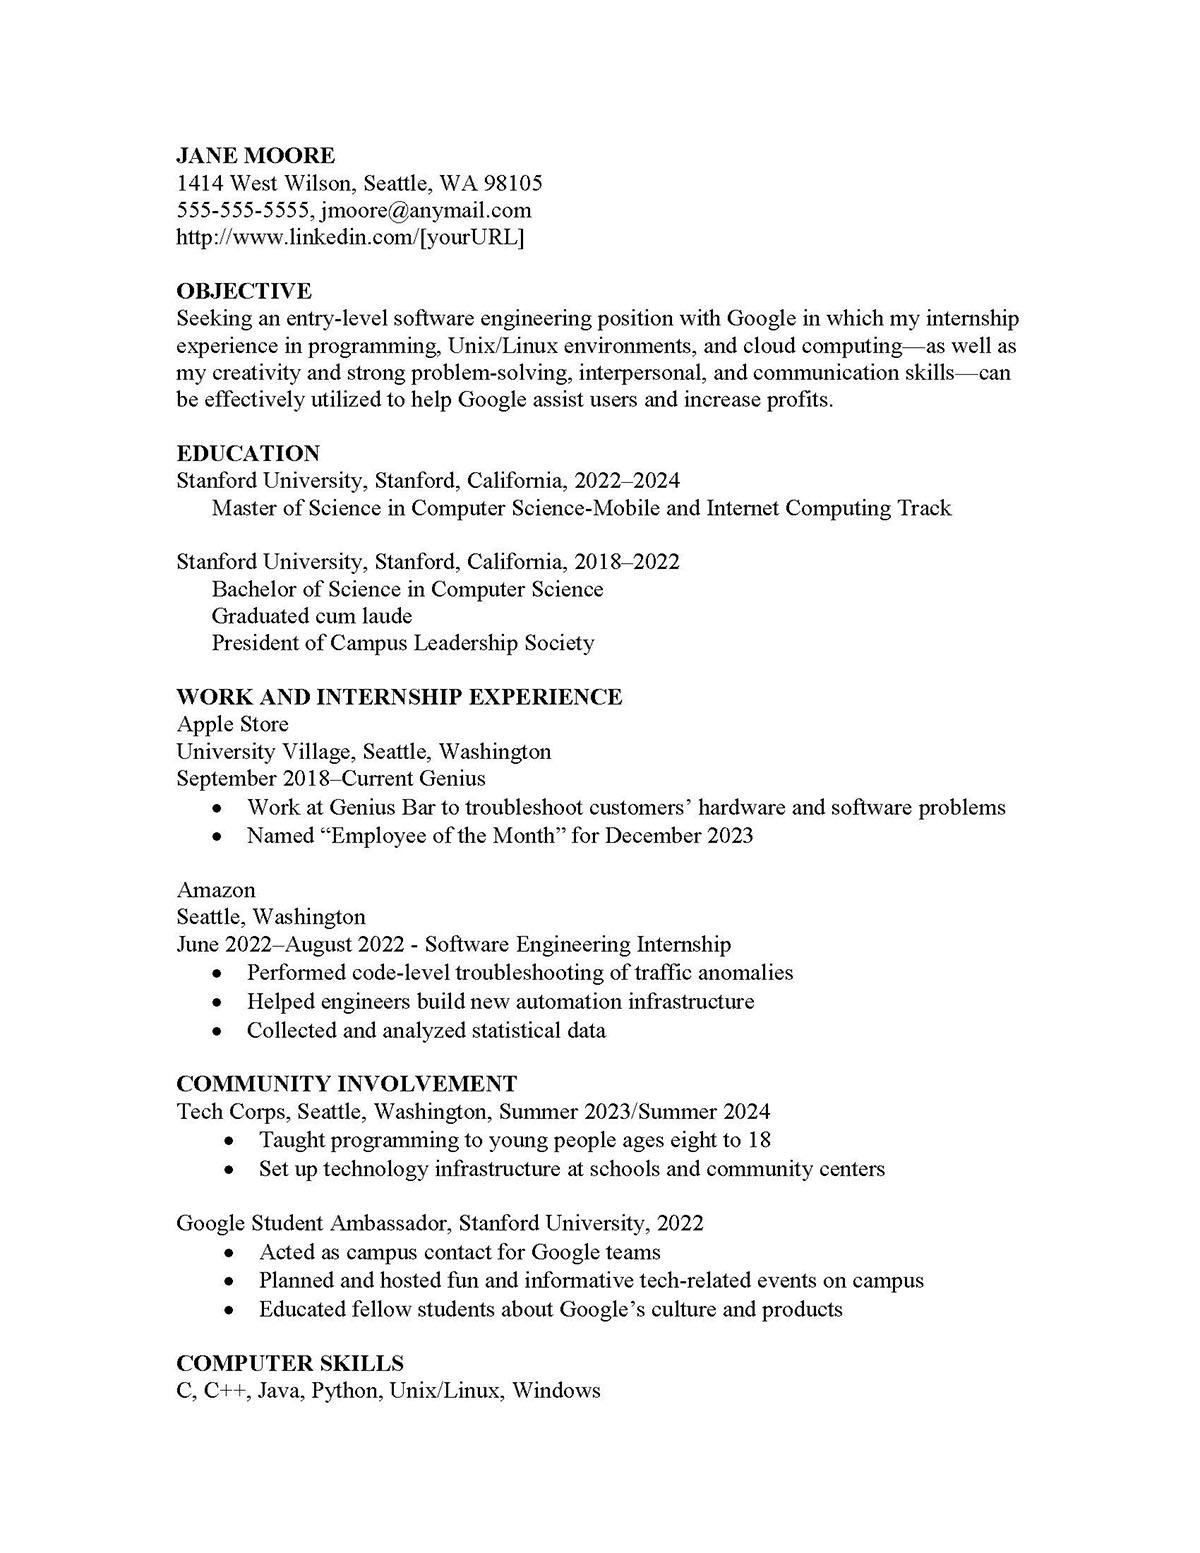 Sample resume: Computer Software, Entry Level, Combination